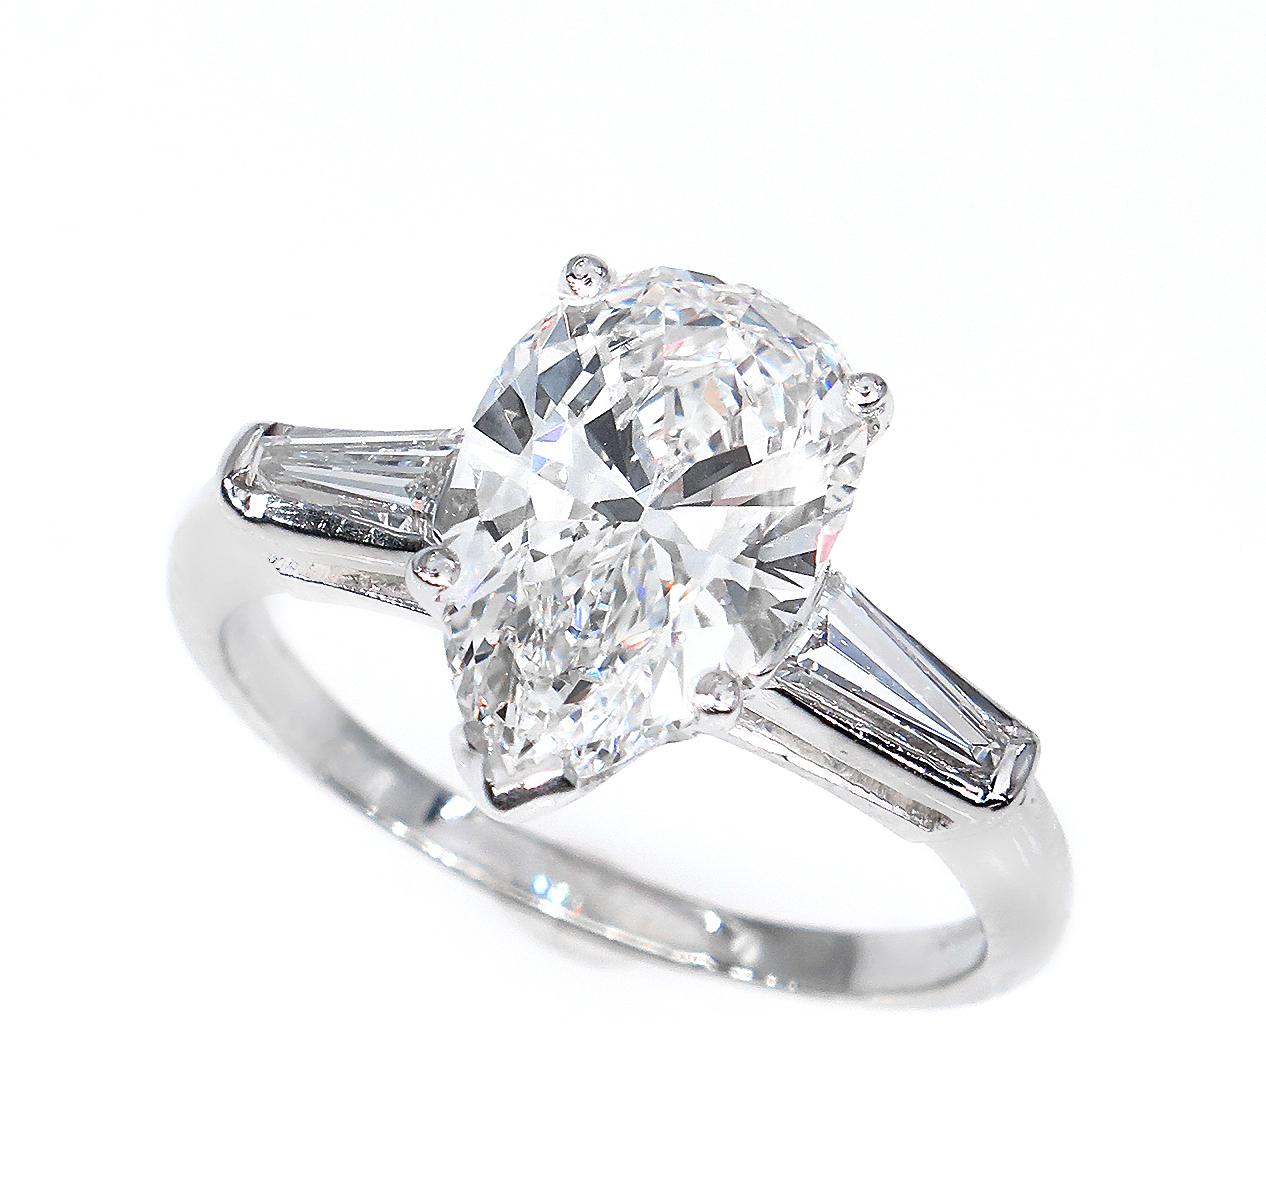 This an exquisite and the most classic, elegant Estate Vintage Pear Shaped Solitaire Ring with over 2ct Center diamond and 2 Large baguettes 2.38ct in total weight .
Great opportunity to own a LARGE 100% NATURAL , NONE-treated Almost FLAWLESS and